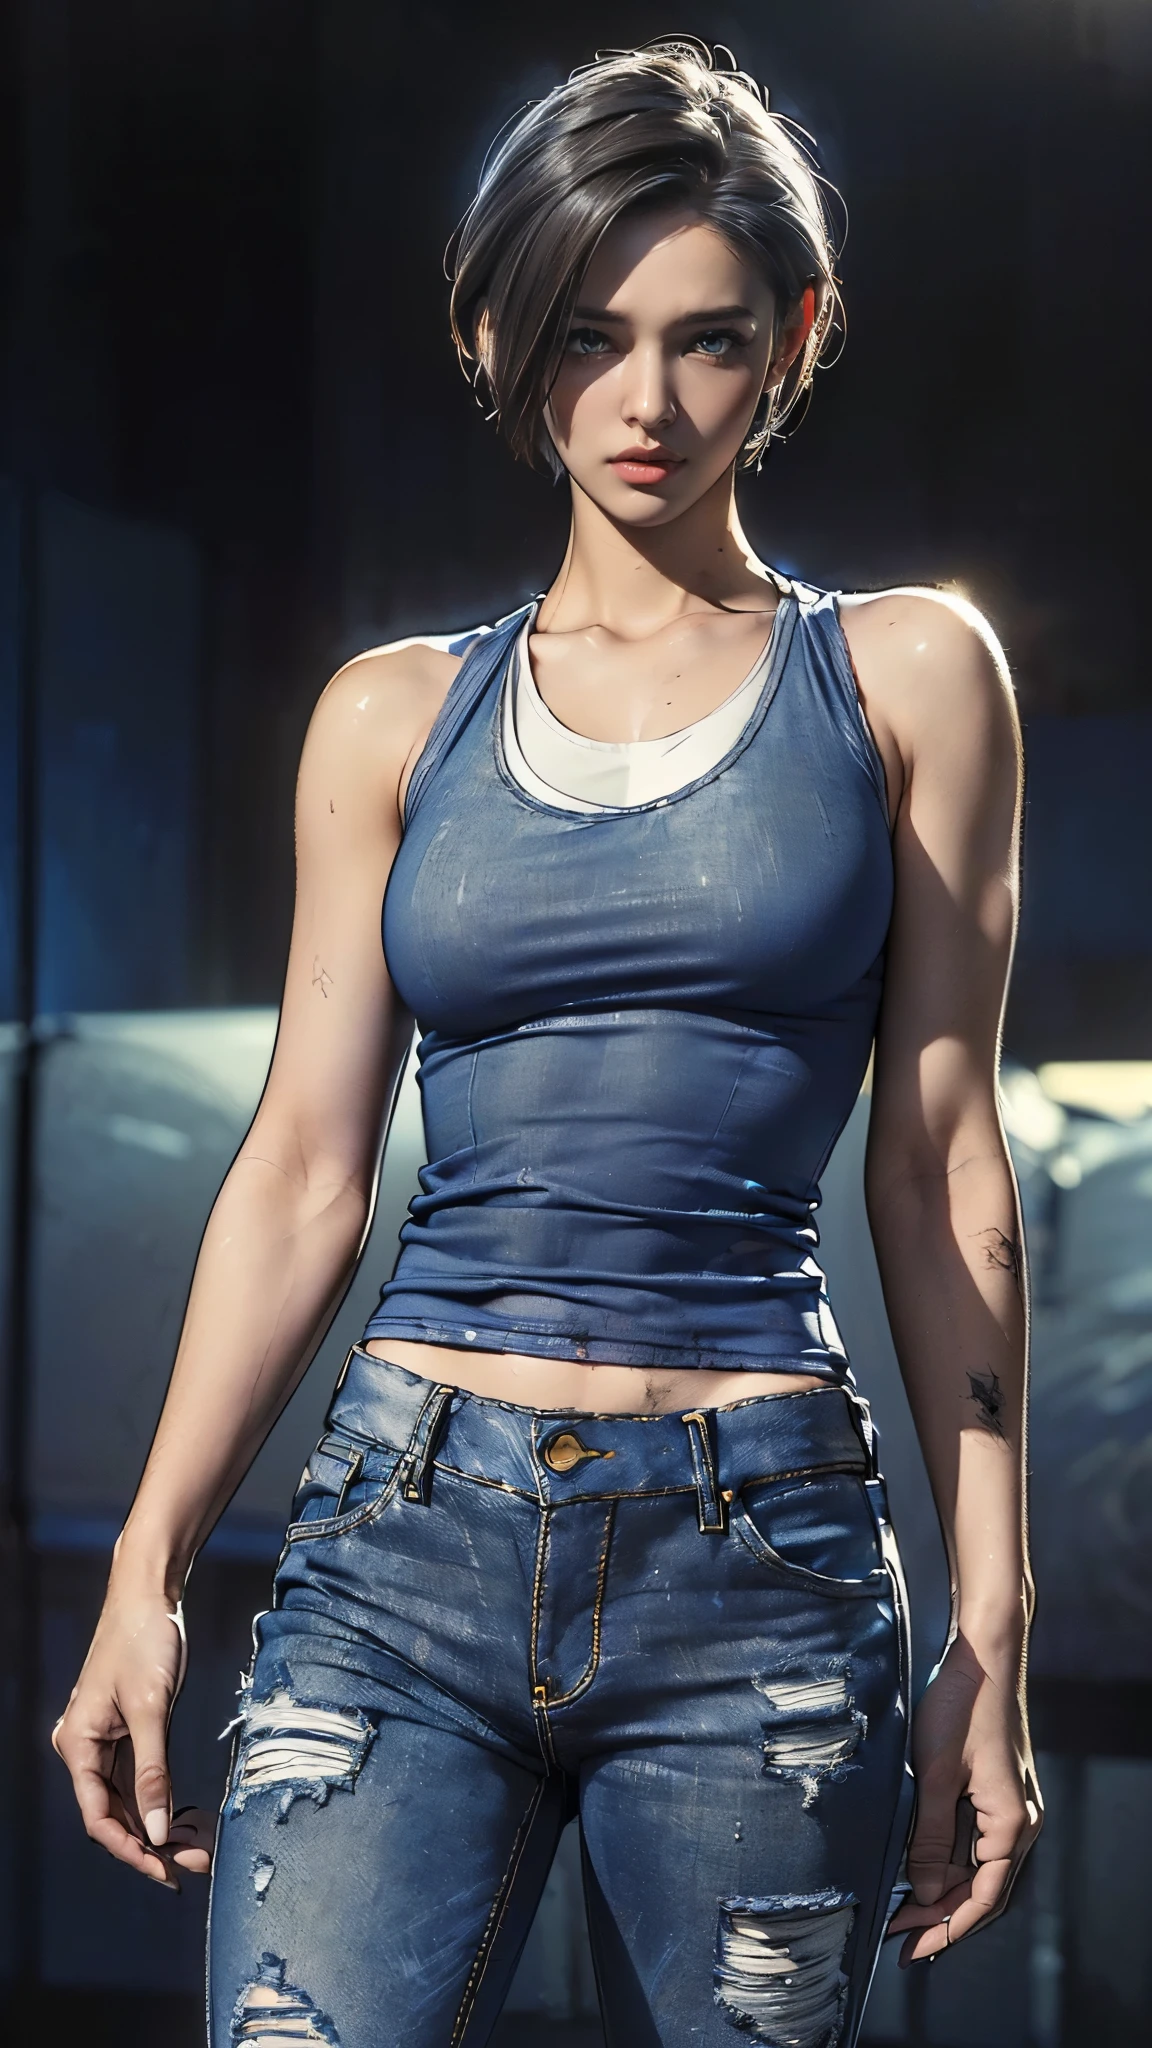 (One Woman),(whole body:1.5),(front:1.5),(((Jill Valentine is standing:1,5))),((Blue tank top:1.5)),((Dirty jeans:1.5)),(black tactical holster:1.2),((White sneakers:1.5)),BREAK((anger:1.5)),(short hair:1.5),(Dirty Face:1.5),(Beautiful Eyes:1.3),(Very detailedな顔:1.5),((Very detailed drawing of a female hand:1.5)),((muscular:1.5)),((Sexy Looks:1.5)),(Beautiful body:1.5),(Very sensual:1.5),BREAK(The background is an American-style night city:1.5),((biohazard style:1.5)),(((Blur the background:1.5))),(Written boundary depth:1.5),BREAK(((masterpiece:1.5),(highest quality:1.5),(Very detailed:1.5),(High resolution:1.5),(Realistic:1.5),(Photorealistic:1.5),(Delicate depiction),(Careful depiction))),8k,wallpaper